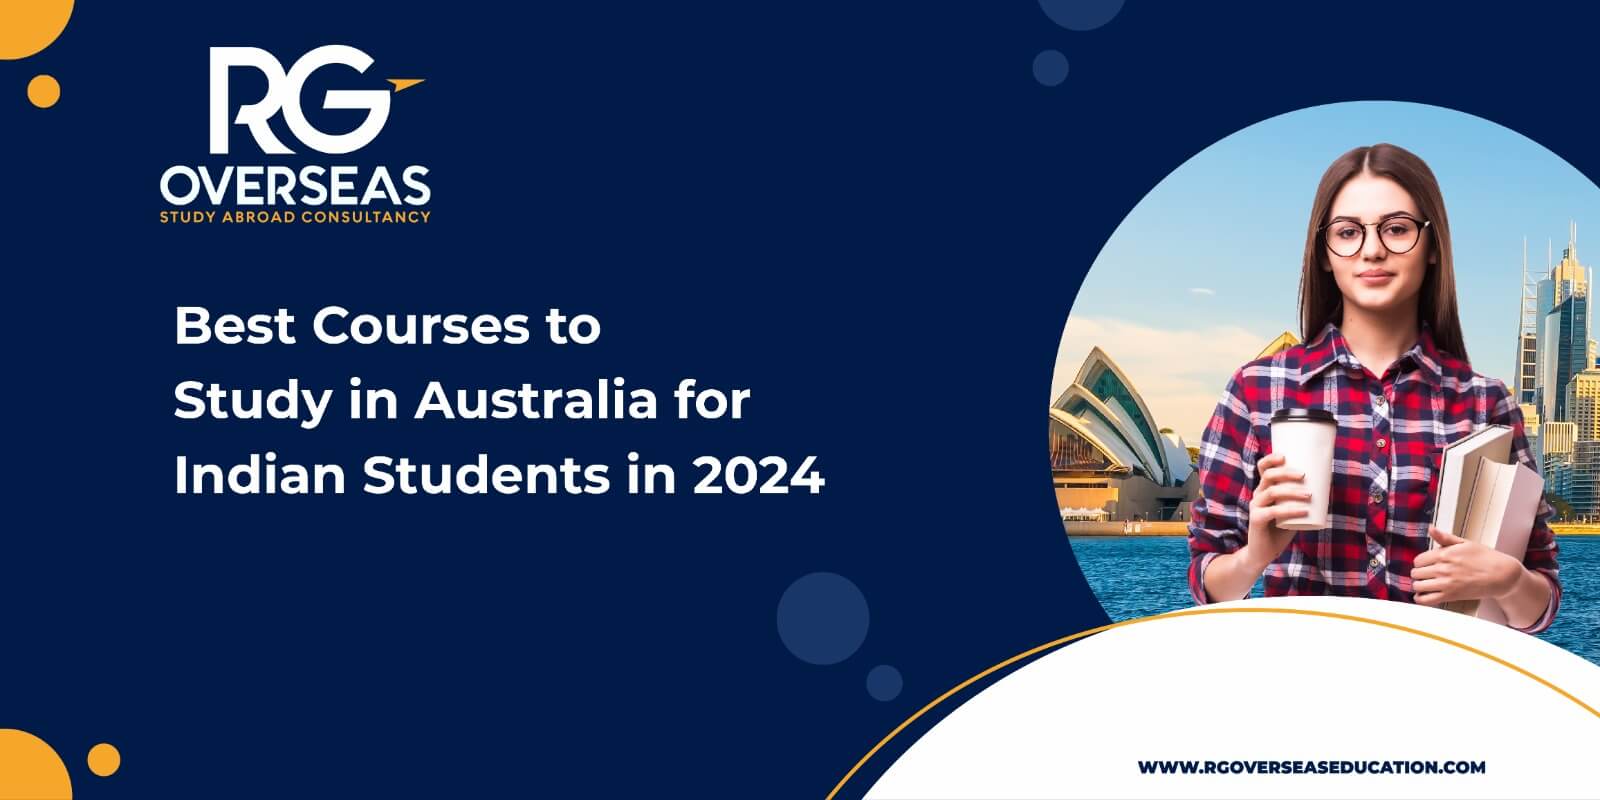 Best Courses to Study in Australia for Indian Students in 2024